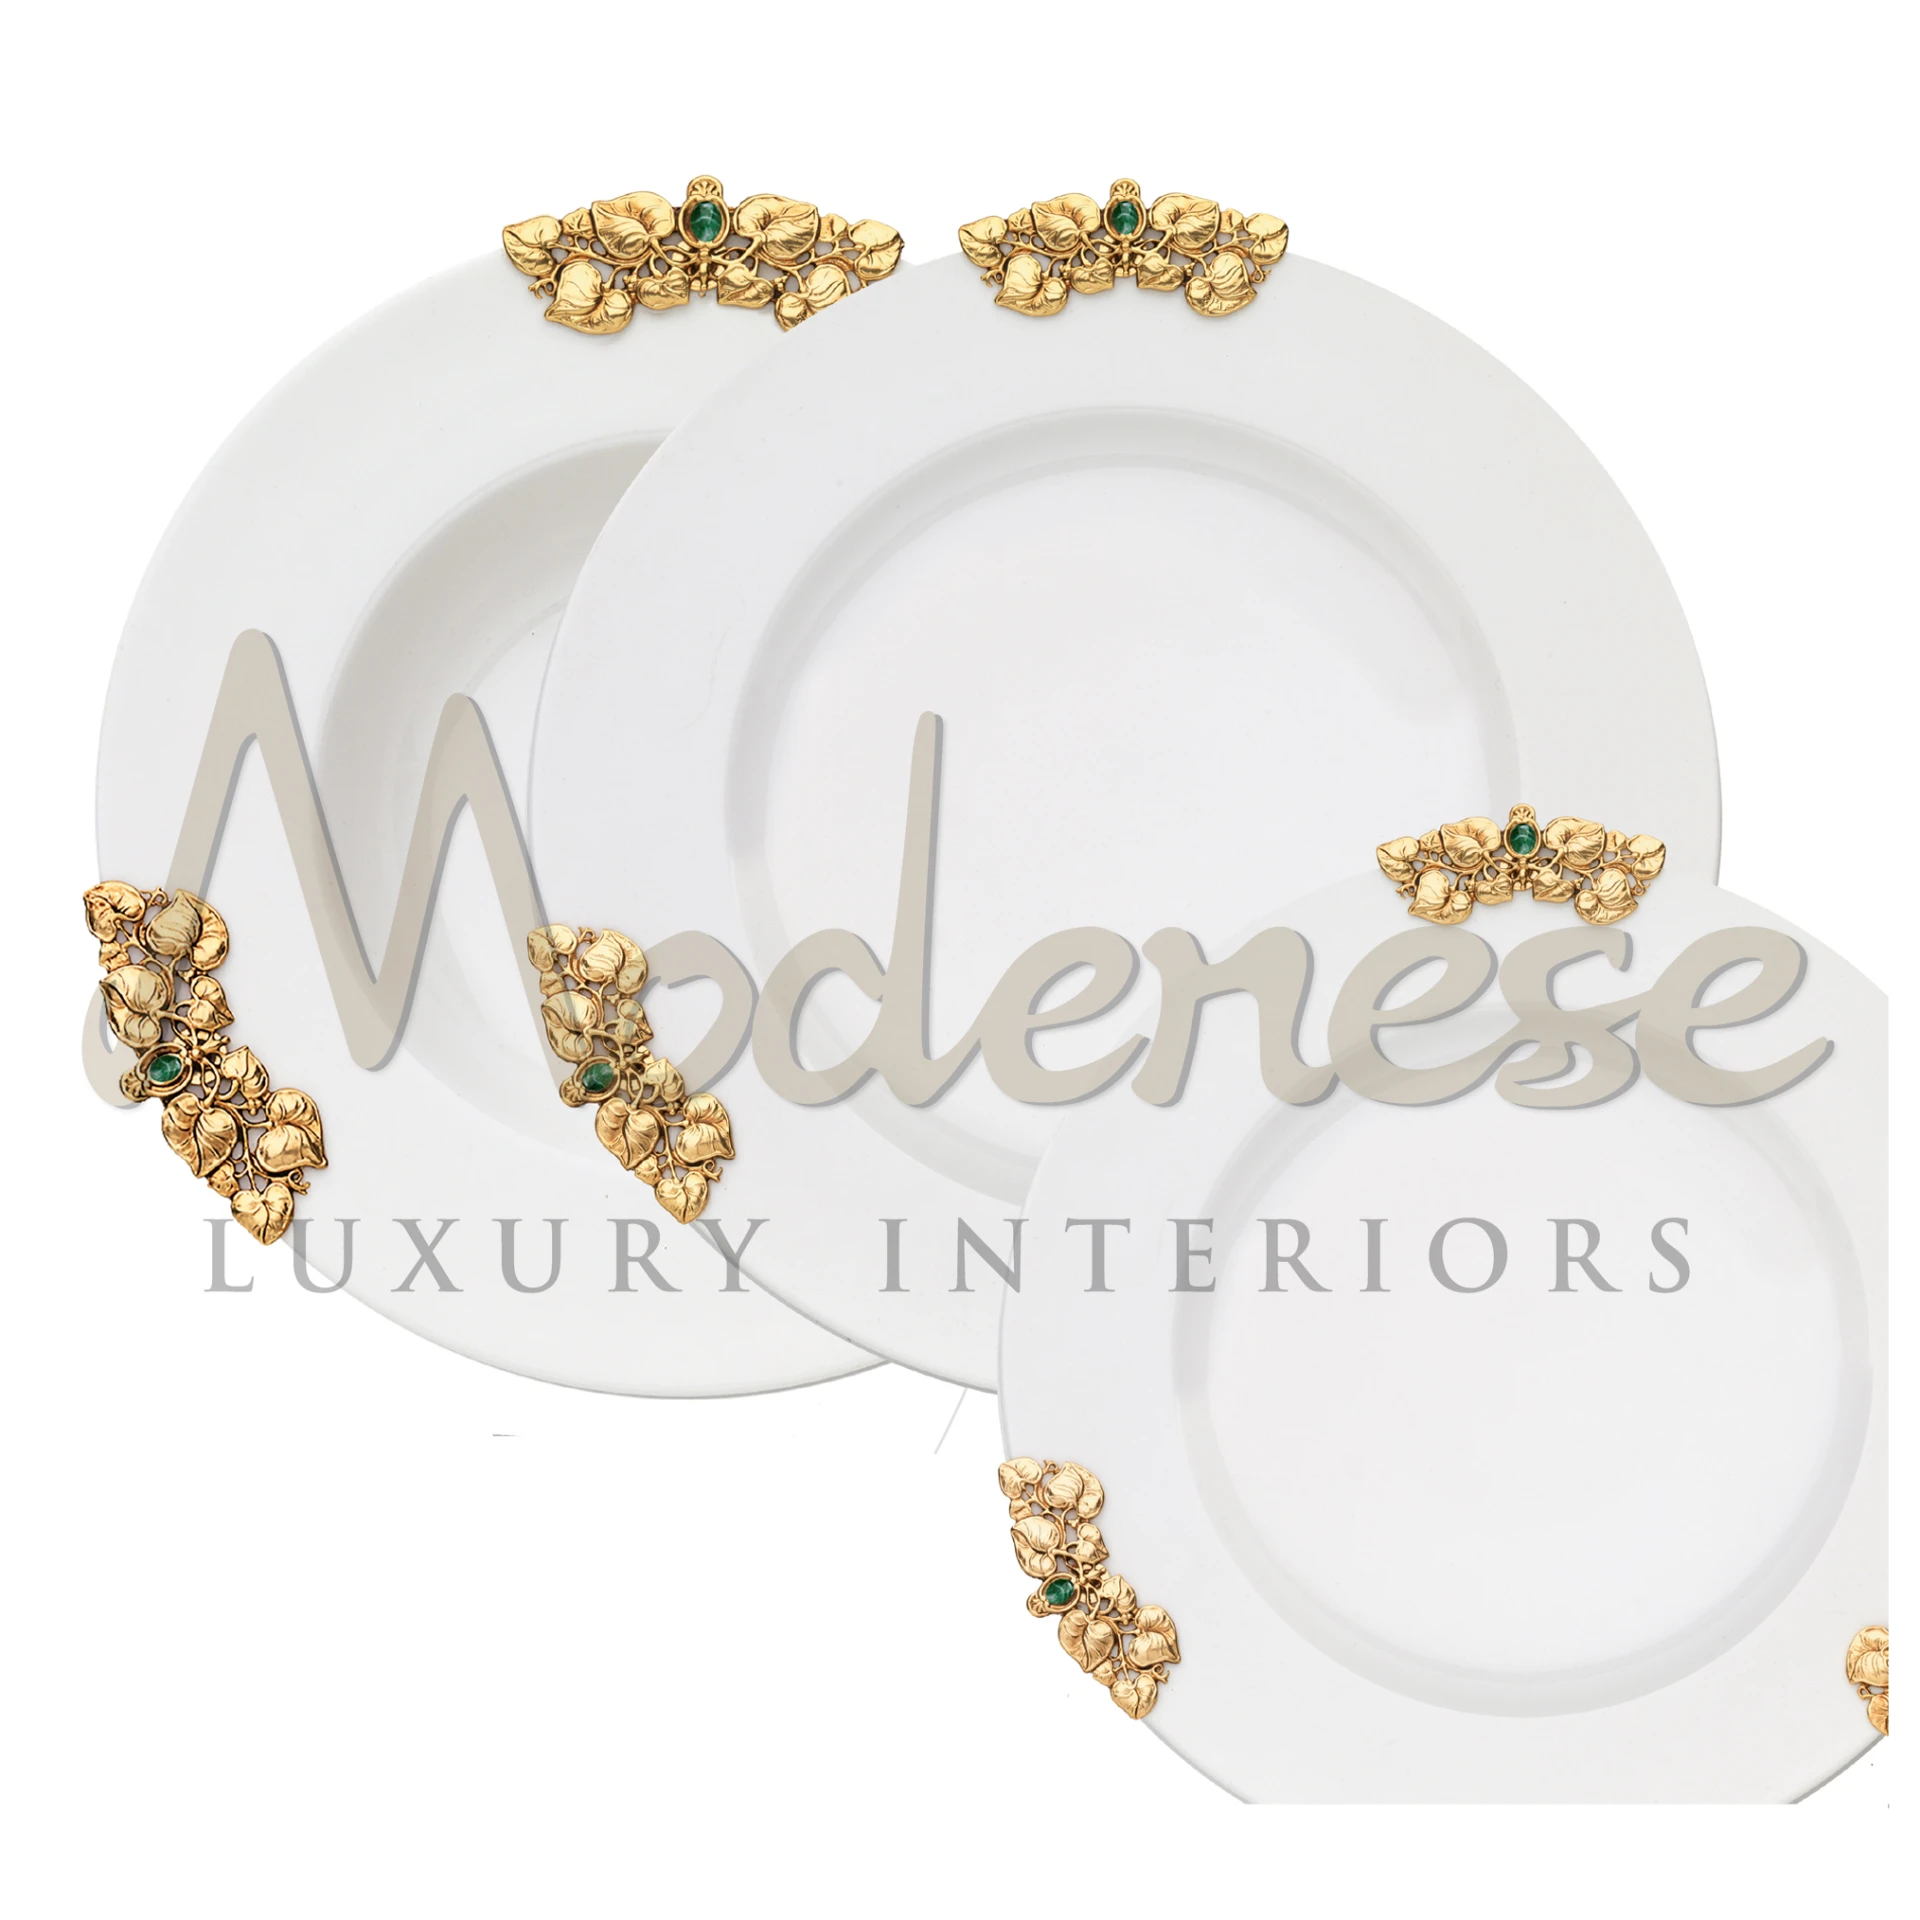 Three white plates, each with intricate golden floral designs and green gemstones.